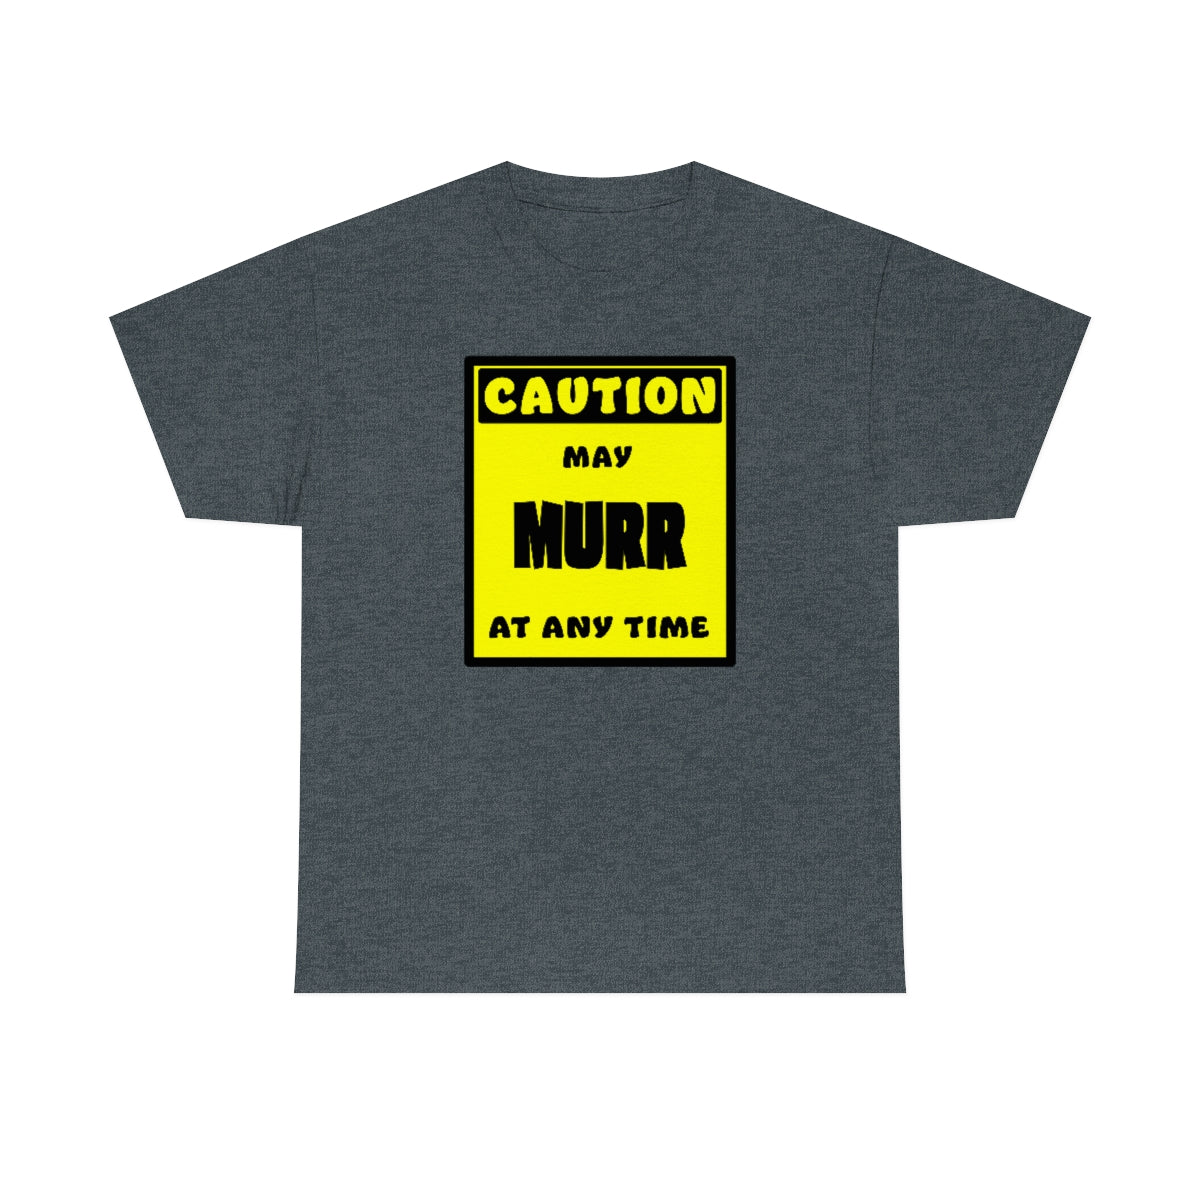 CAUTION! May MURR at any time! - T-Shirt T-Shirt AFLT-Whootorca Dark Heather S 